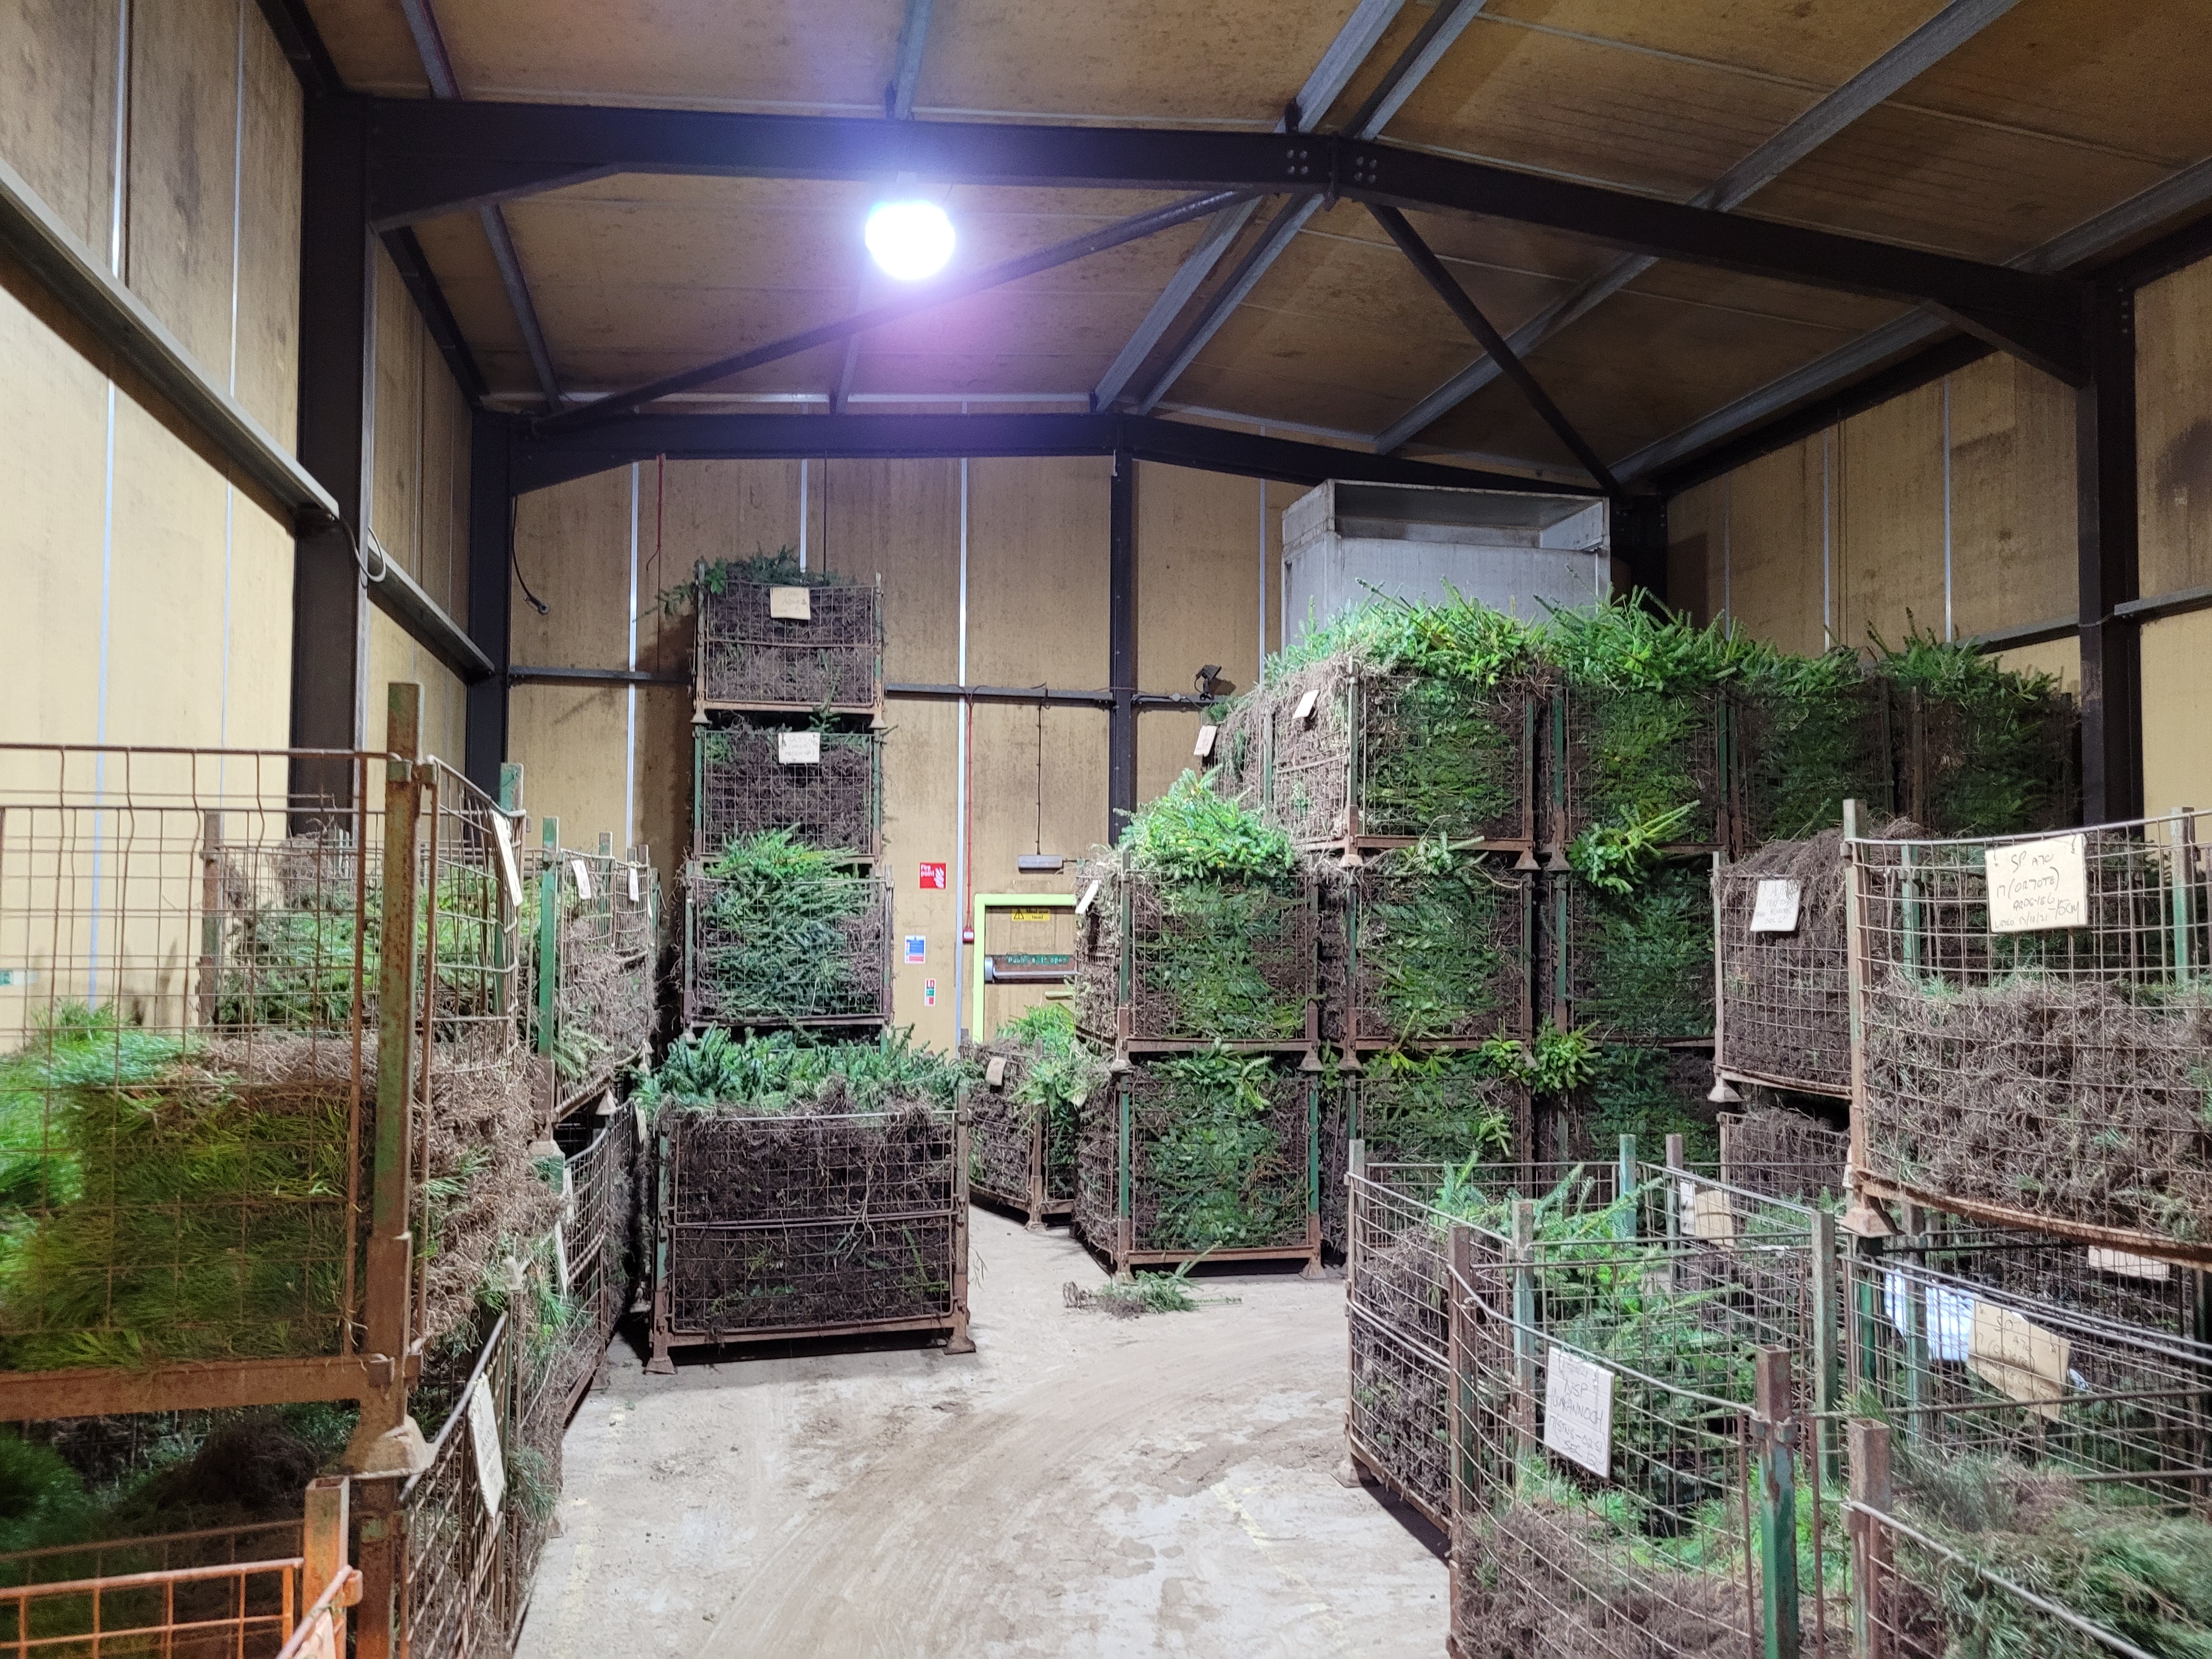 Crates of small trees stacked in a large warehouse.